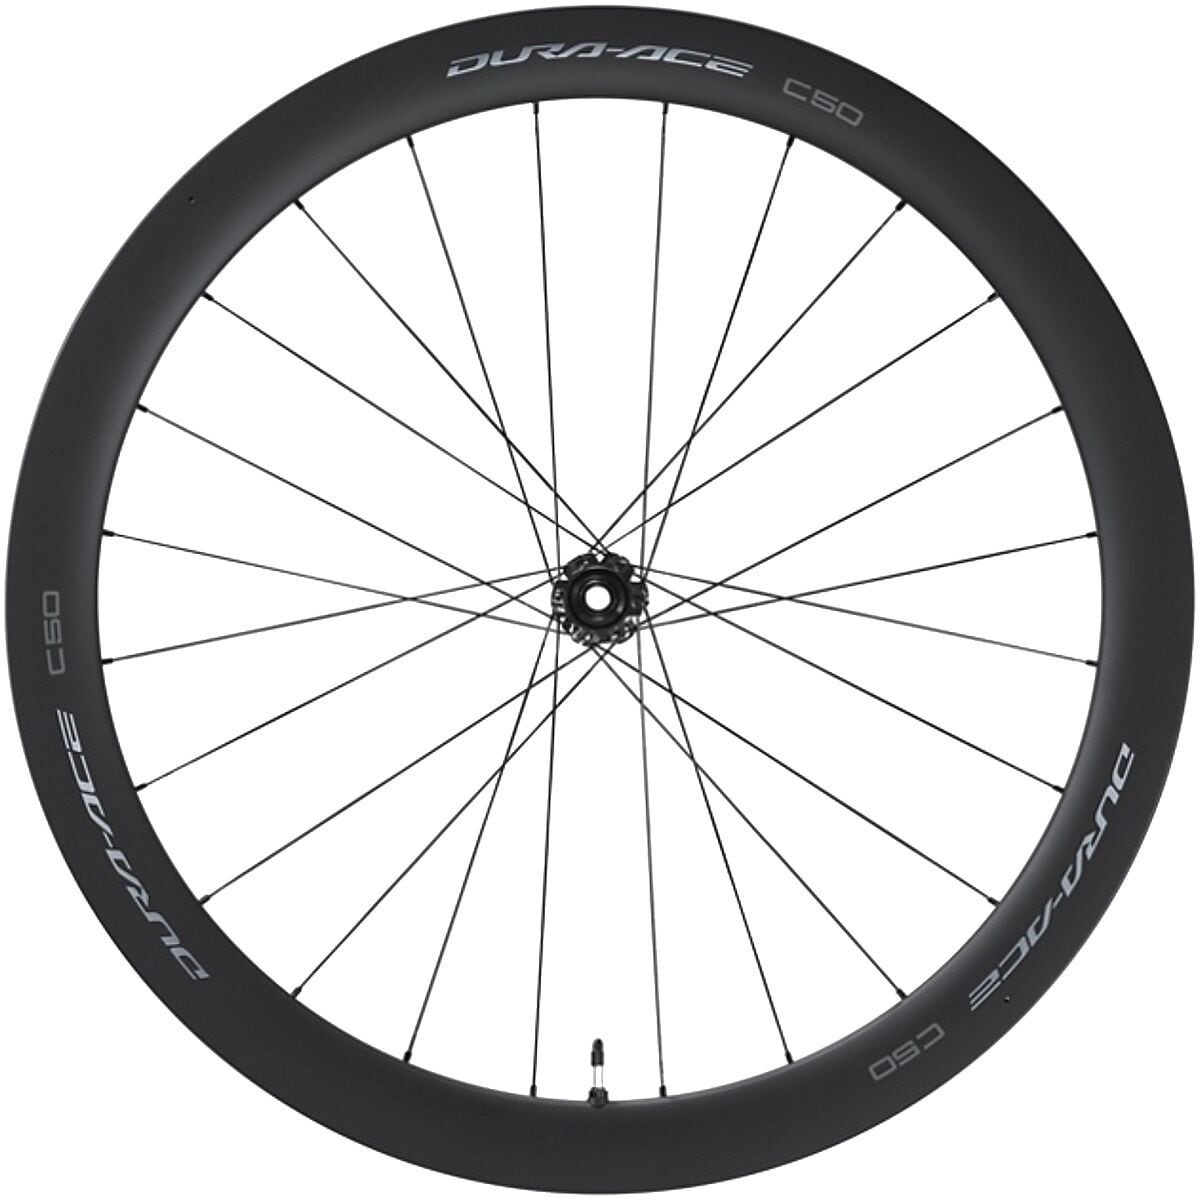 Shimano Dura-Ace WH-R9270 C50 Carbon Road Wheelset - Tubeless